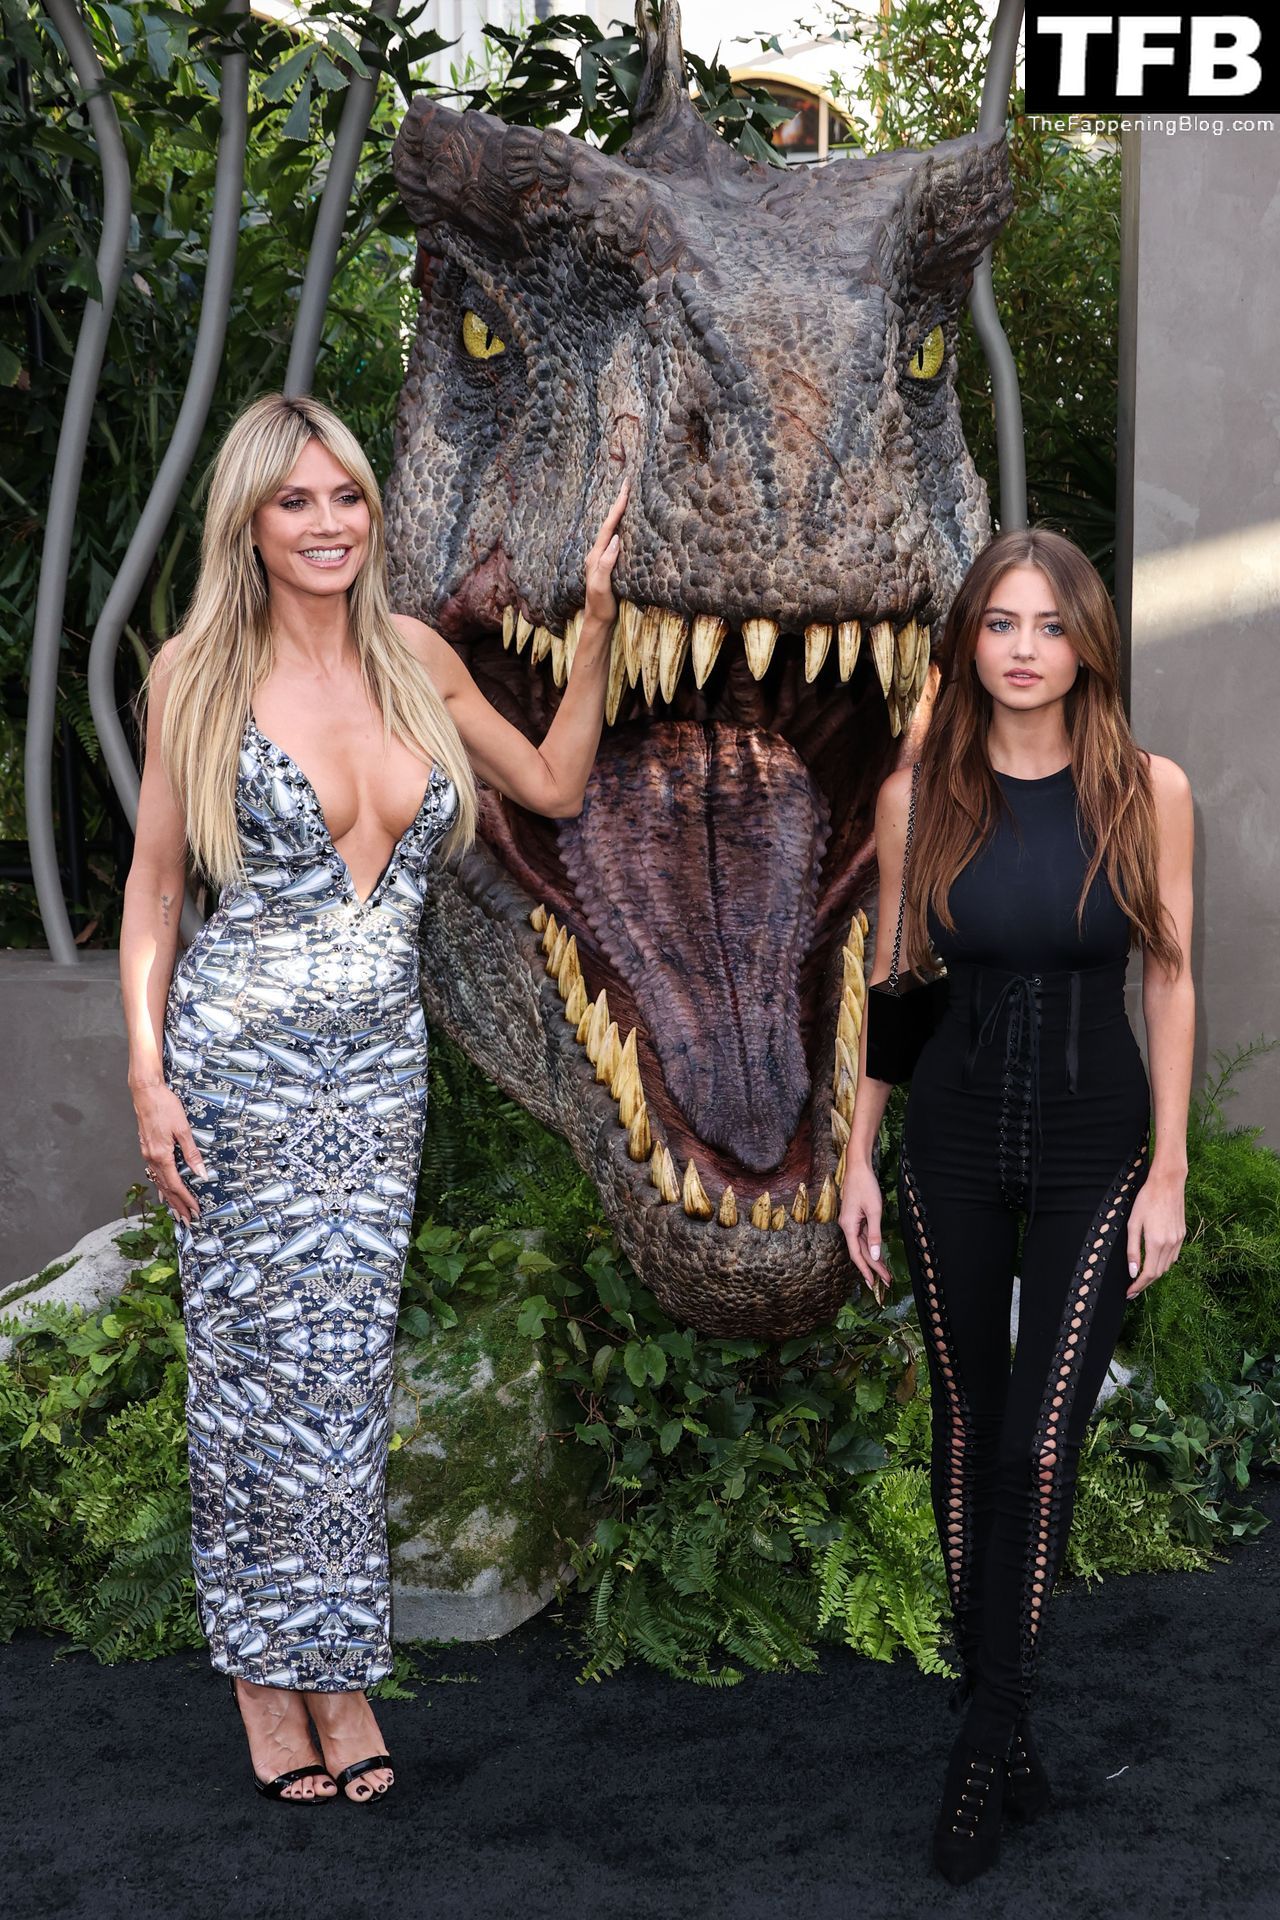 Leni Klum Looks Pretty in Black at the “Jurassic World Dominion” Premiere in Hollywood (73 Photos)